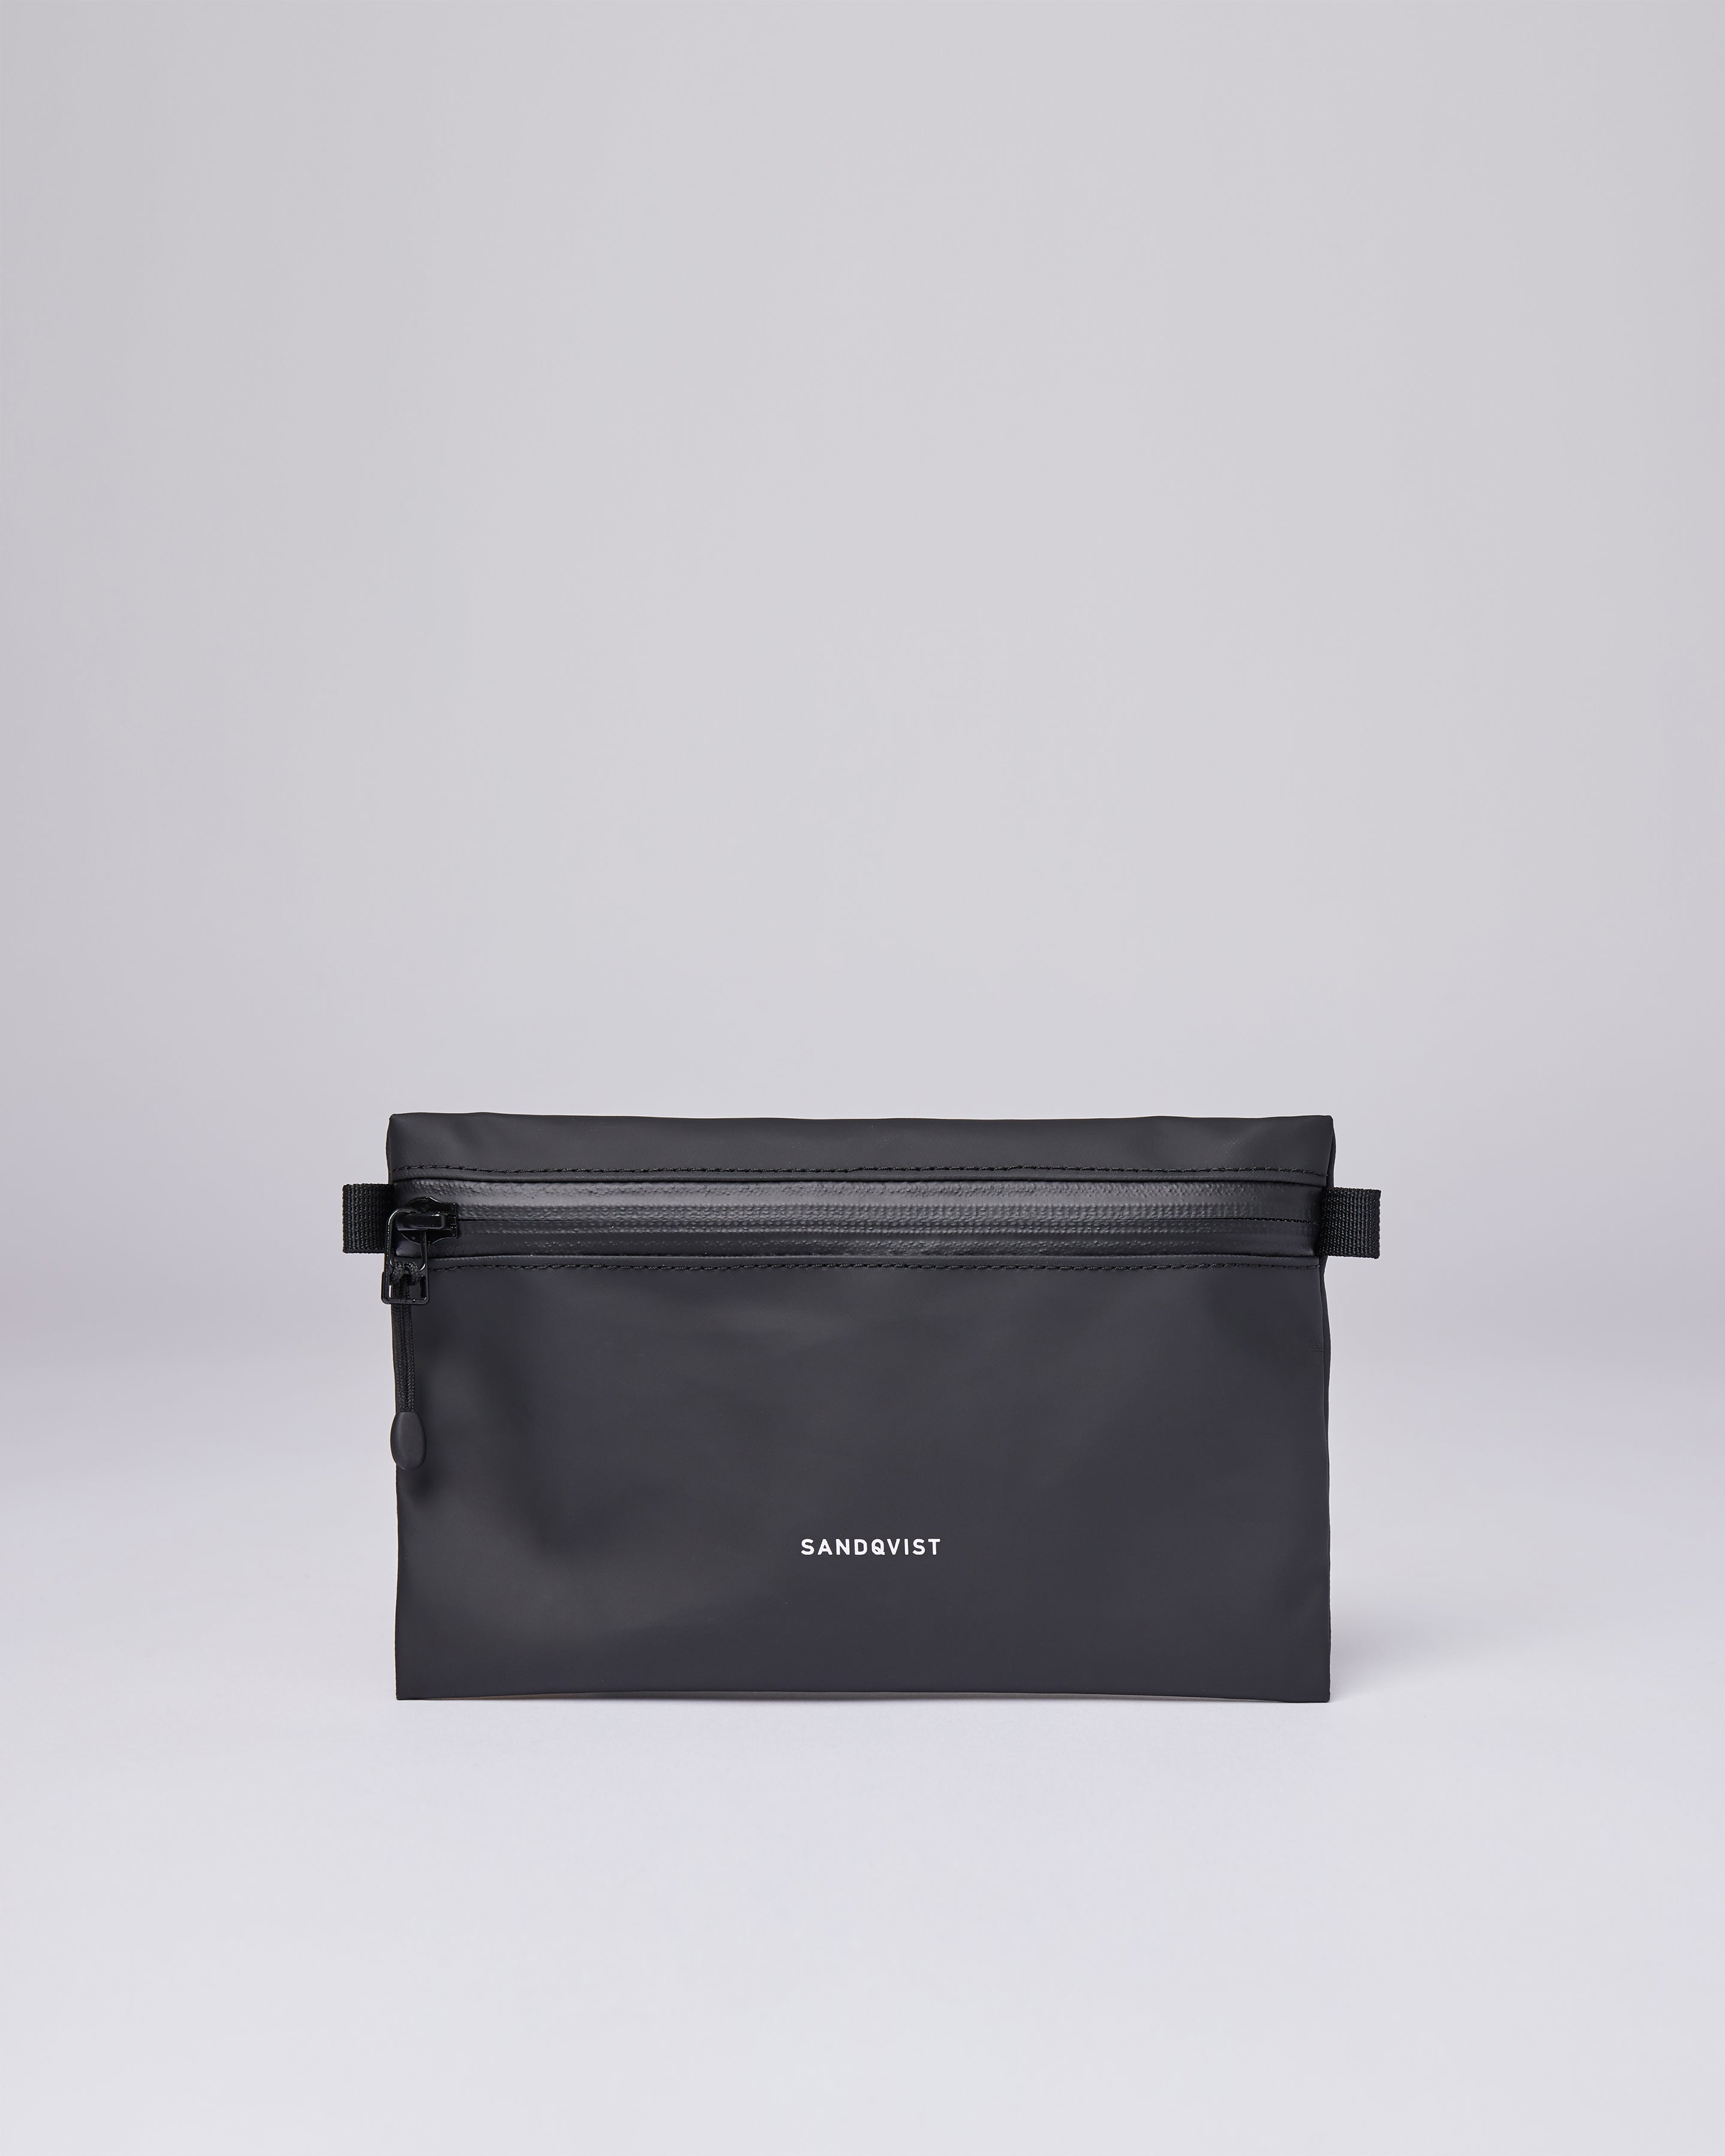 Sandqvist Ola Accessory Bag in Black SQA1856 | Shop from eightywingold an official brand partner for Sandqvist Canada and US.